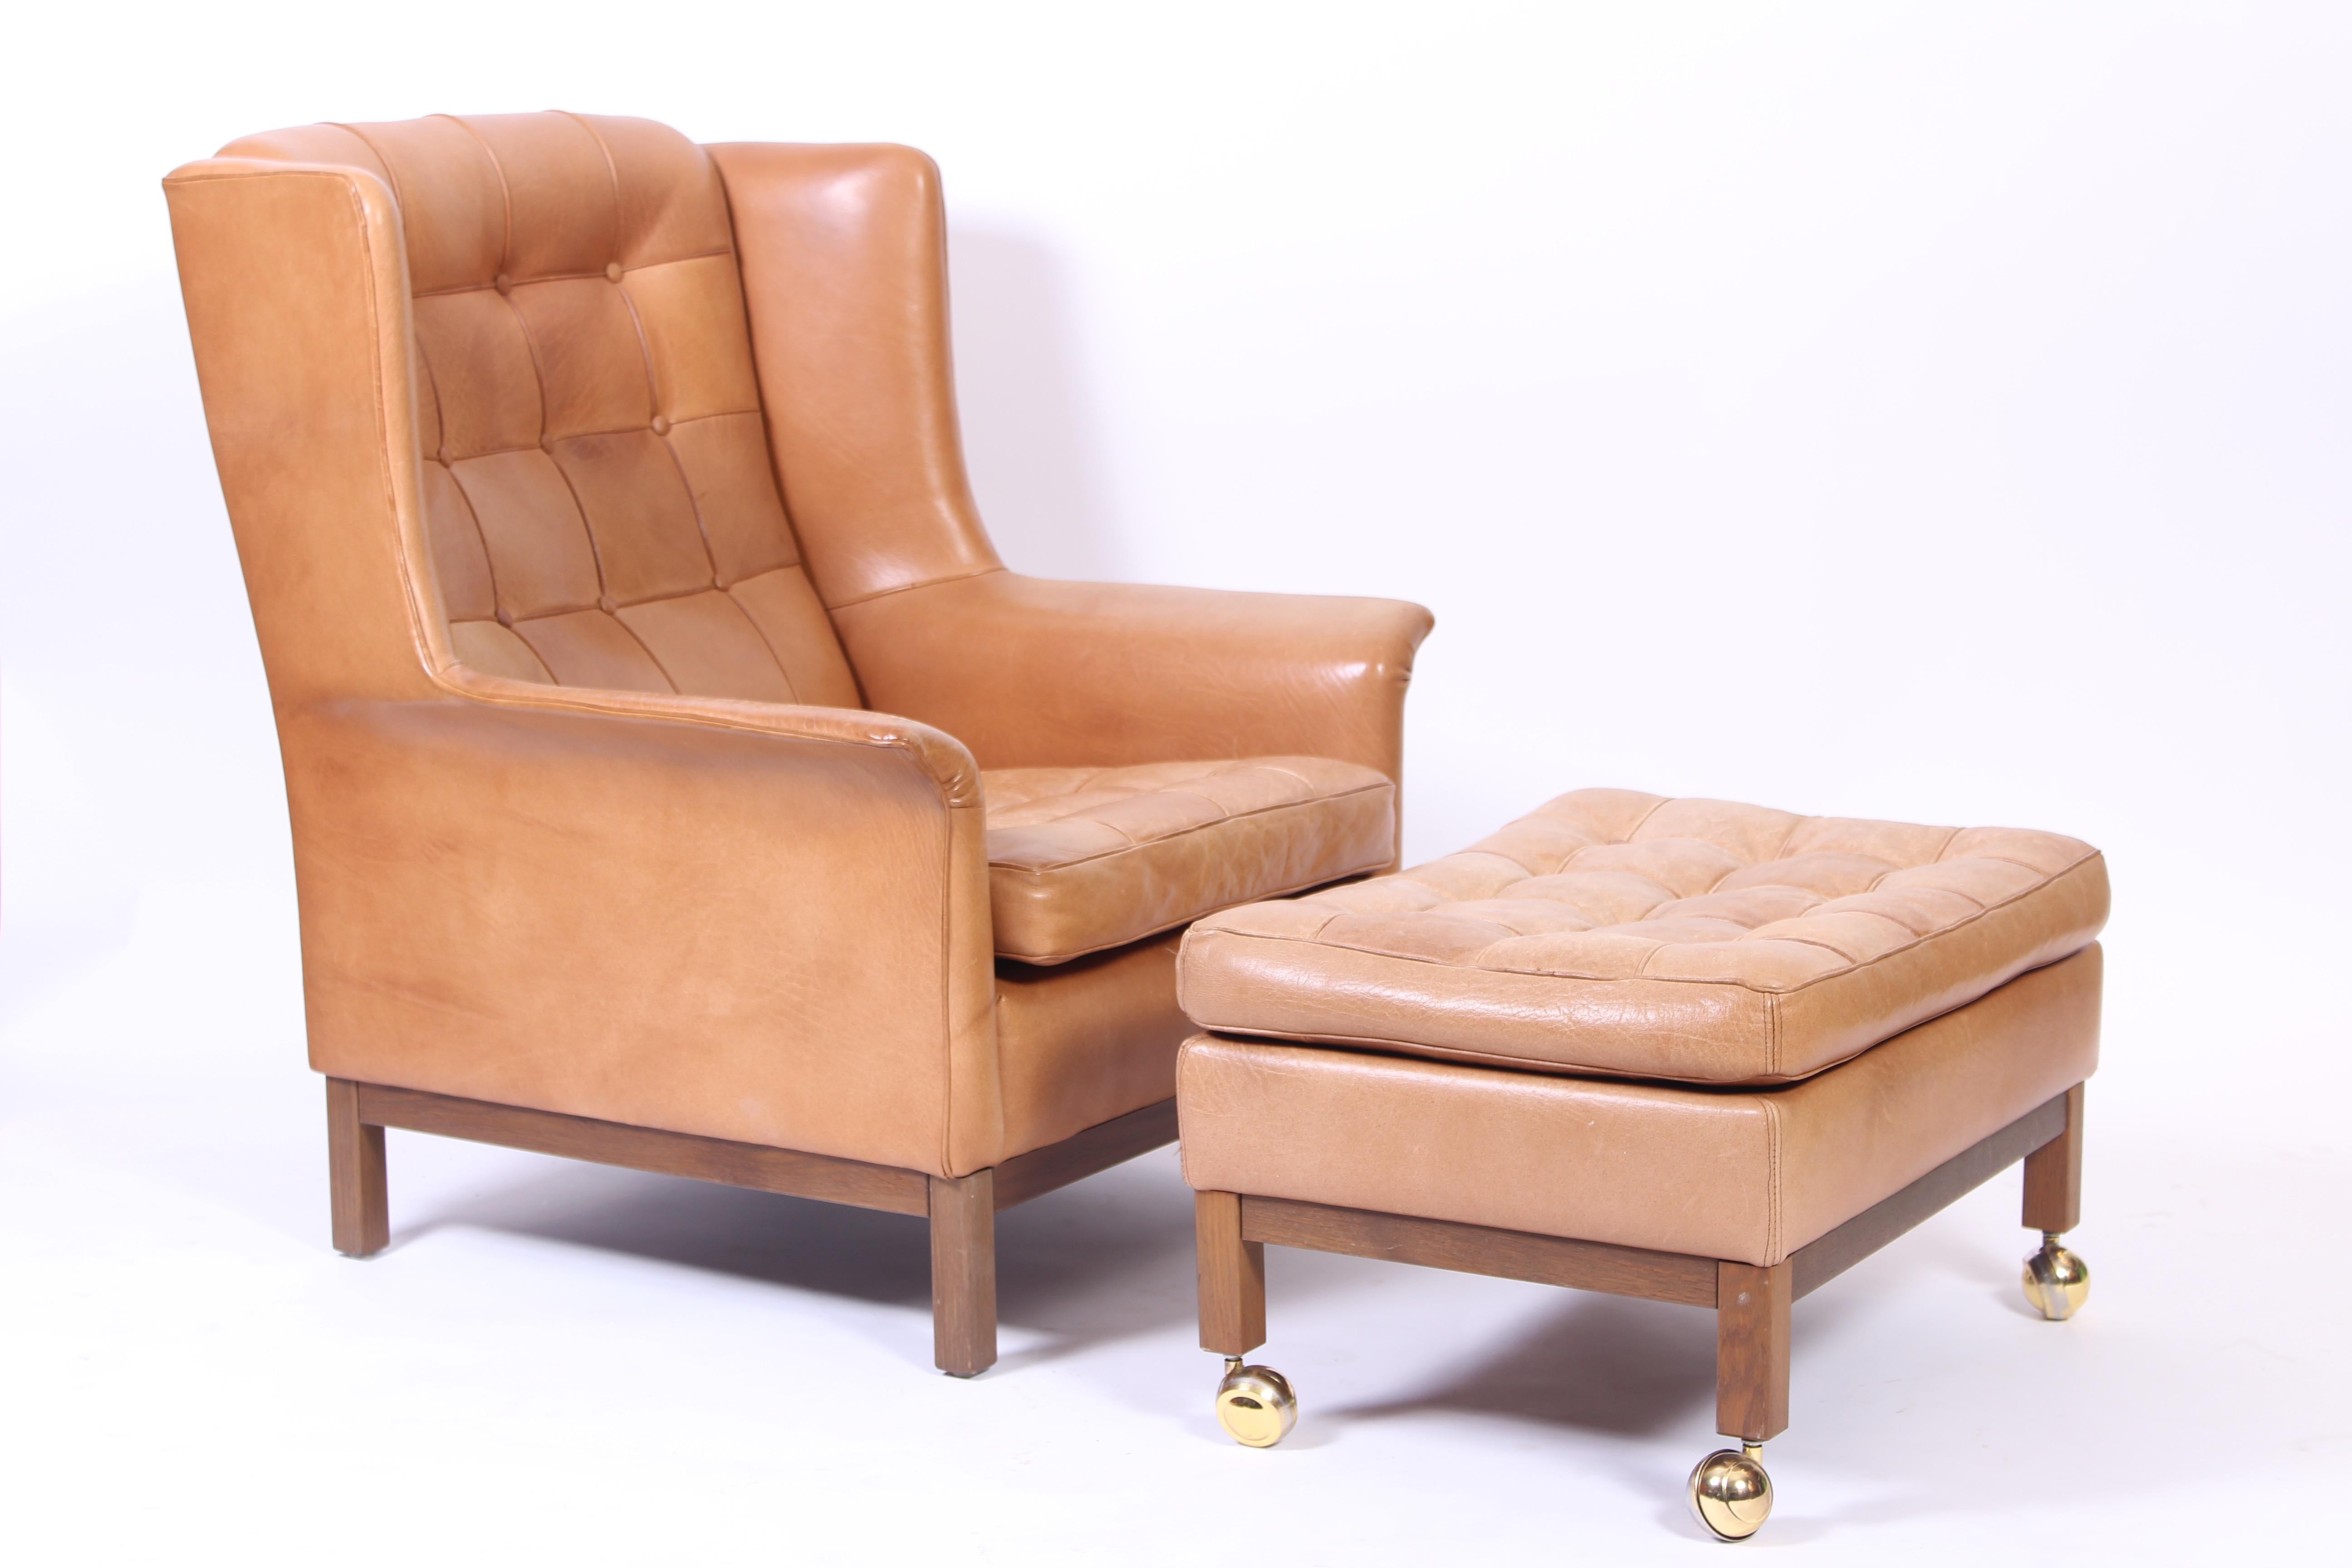 Pair of Midcentury Arne Norell Lounge Chairs with Ottoman, 1960s For Sale 5